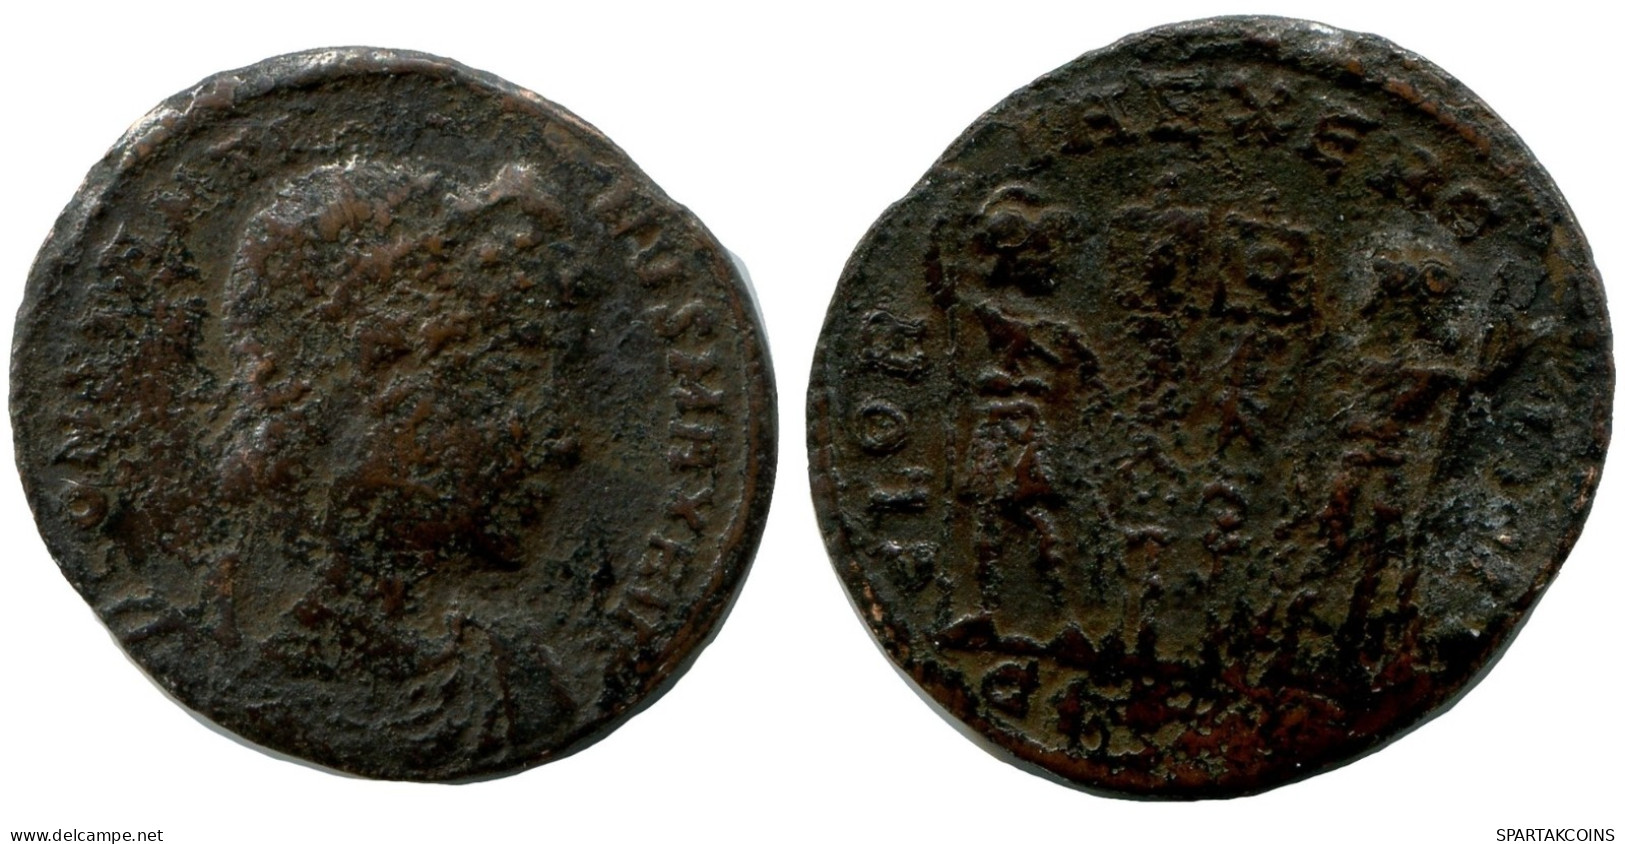 CONSTANTINE I MINTED IN CONSTANTINOPLE FOUND IN IHNASYAH HOARD #ANC10802.14.D.A - El Imperio Christiano (307 / 363)